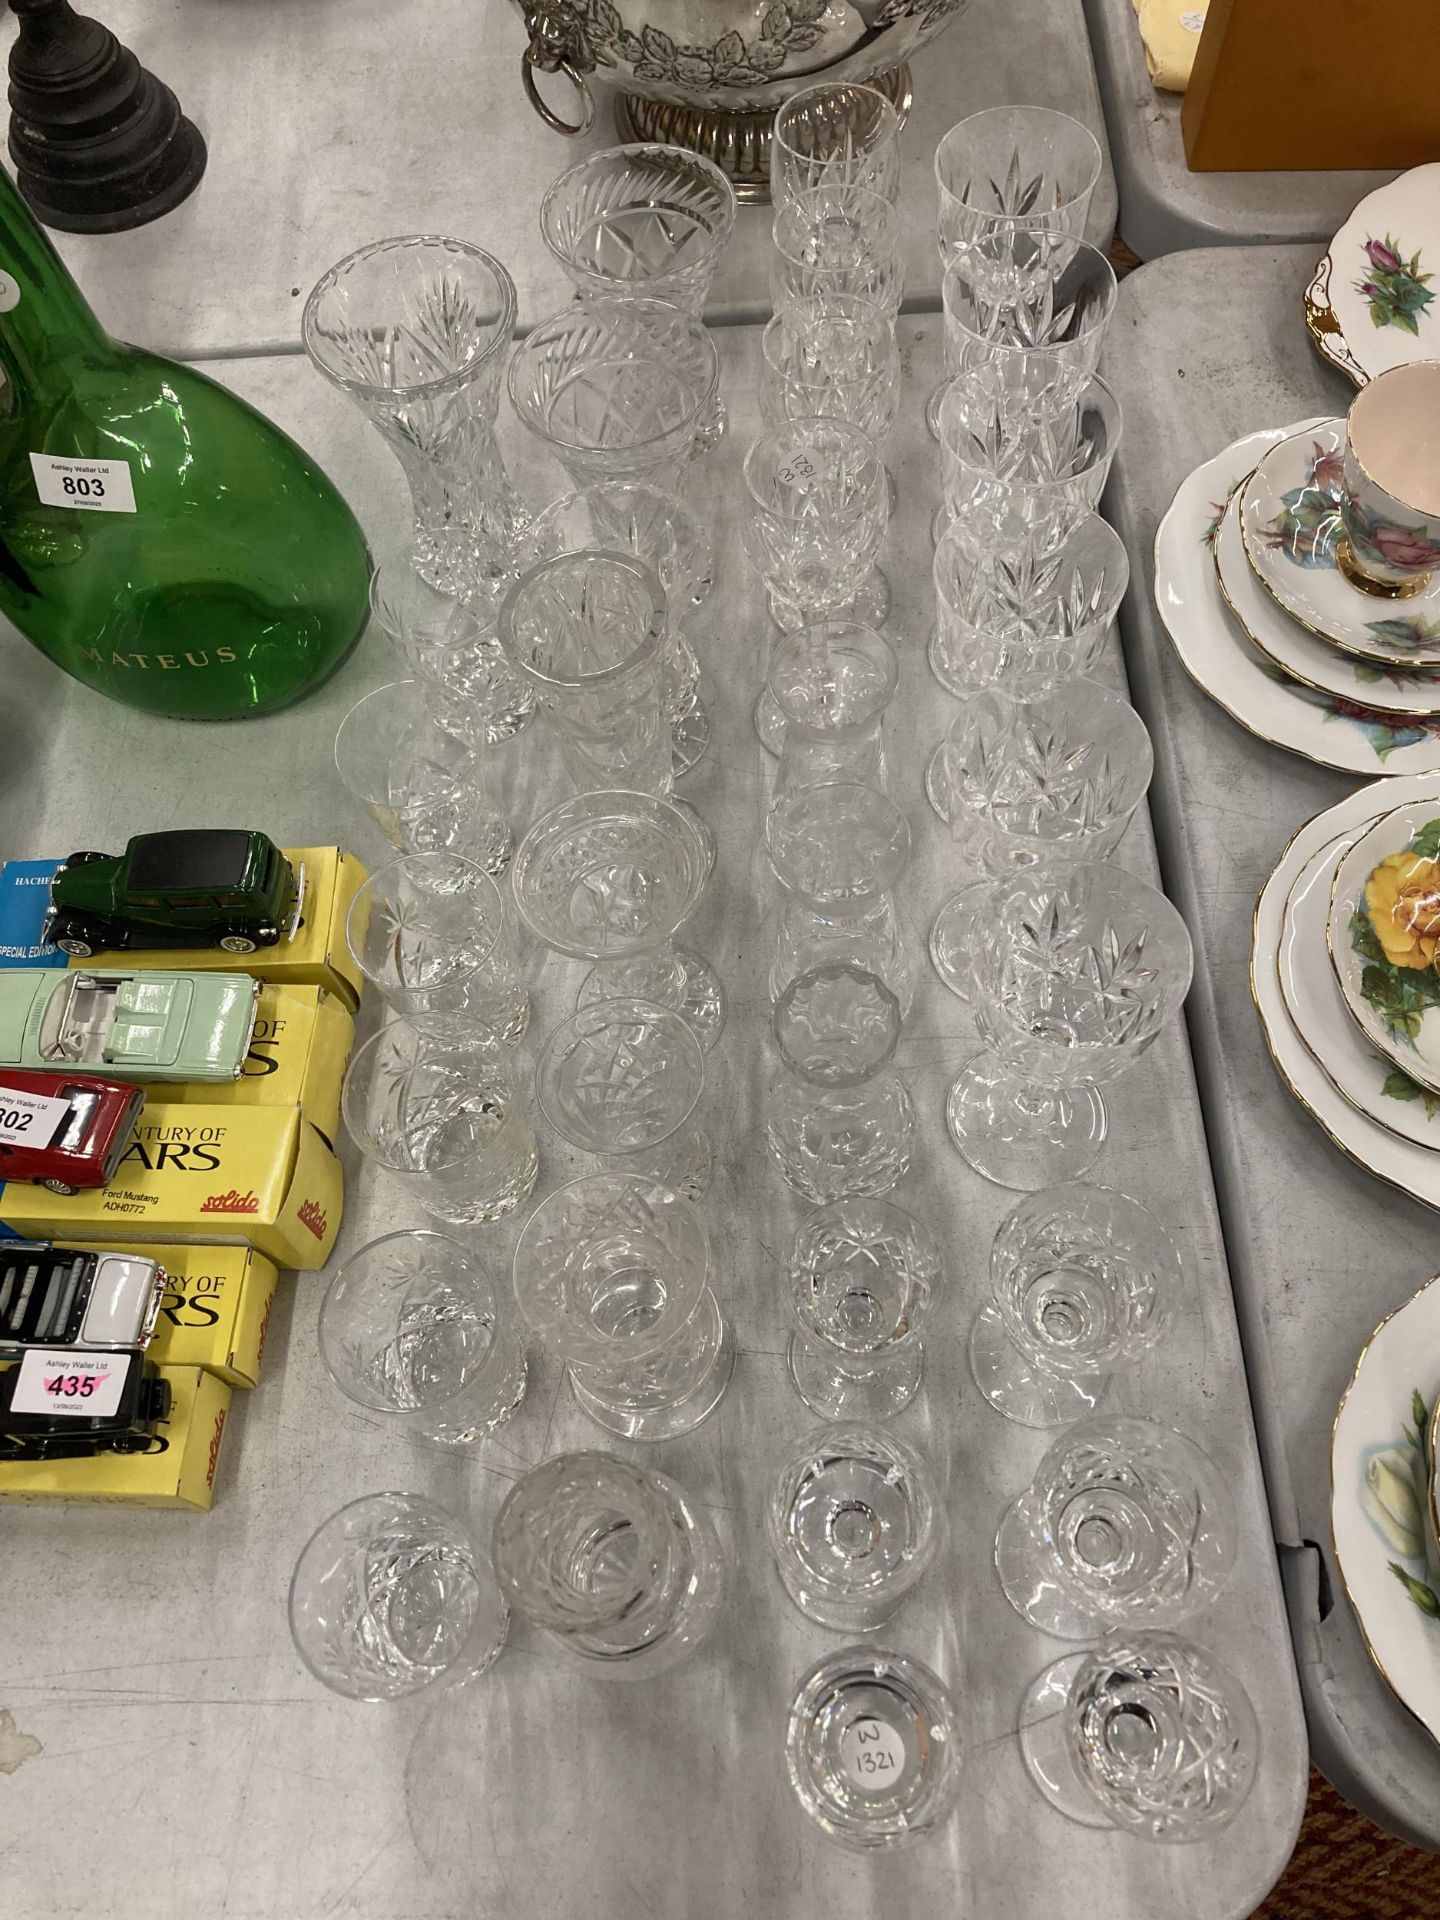 A LARGE COLLECTION OF CUT GLASS DRINKING GLASSES - Image 2 of 3